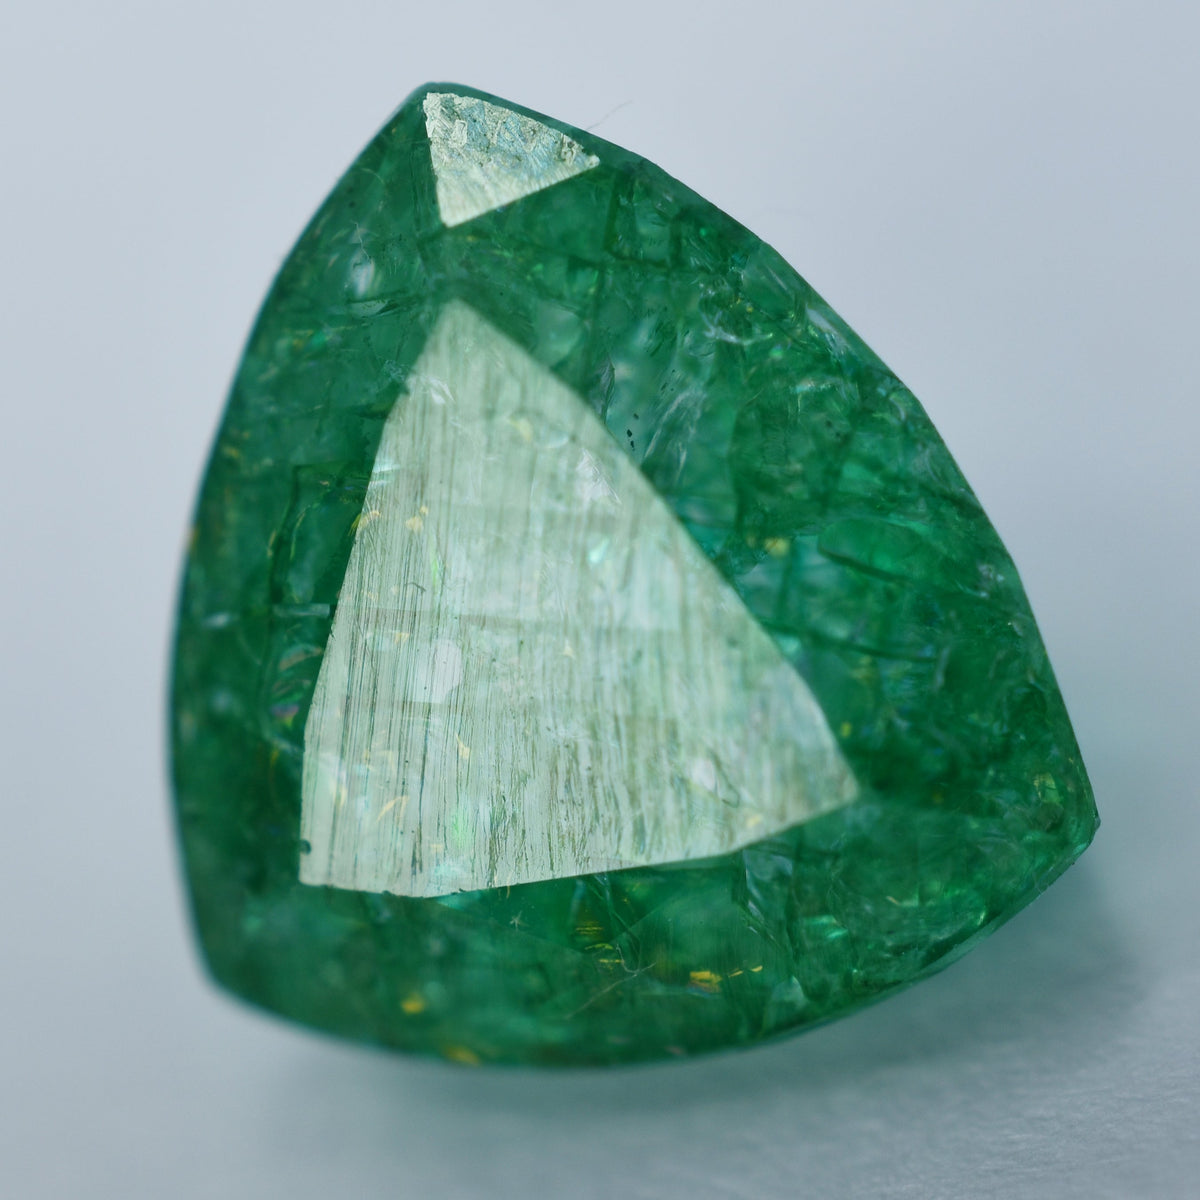 Trillion Cut Emerald AA Natural Real Zambian Emerald Gemstone 10.23 Ct Loose for wedding Rings, Certified Emerald Cut Stone Gifts for her , Rare vivid green emerald